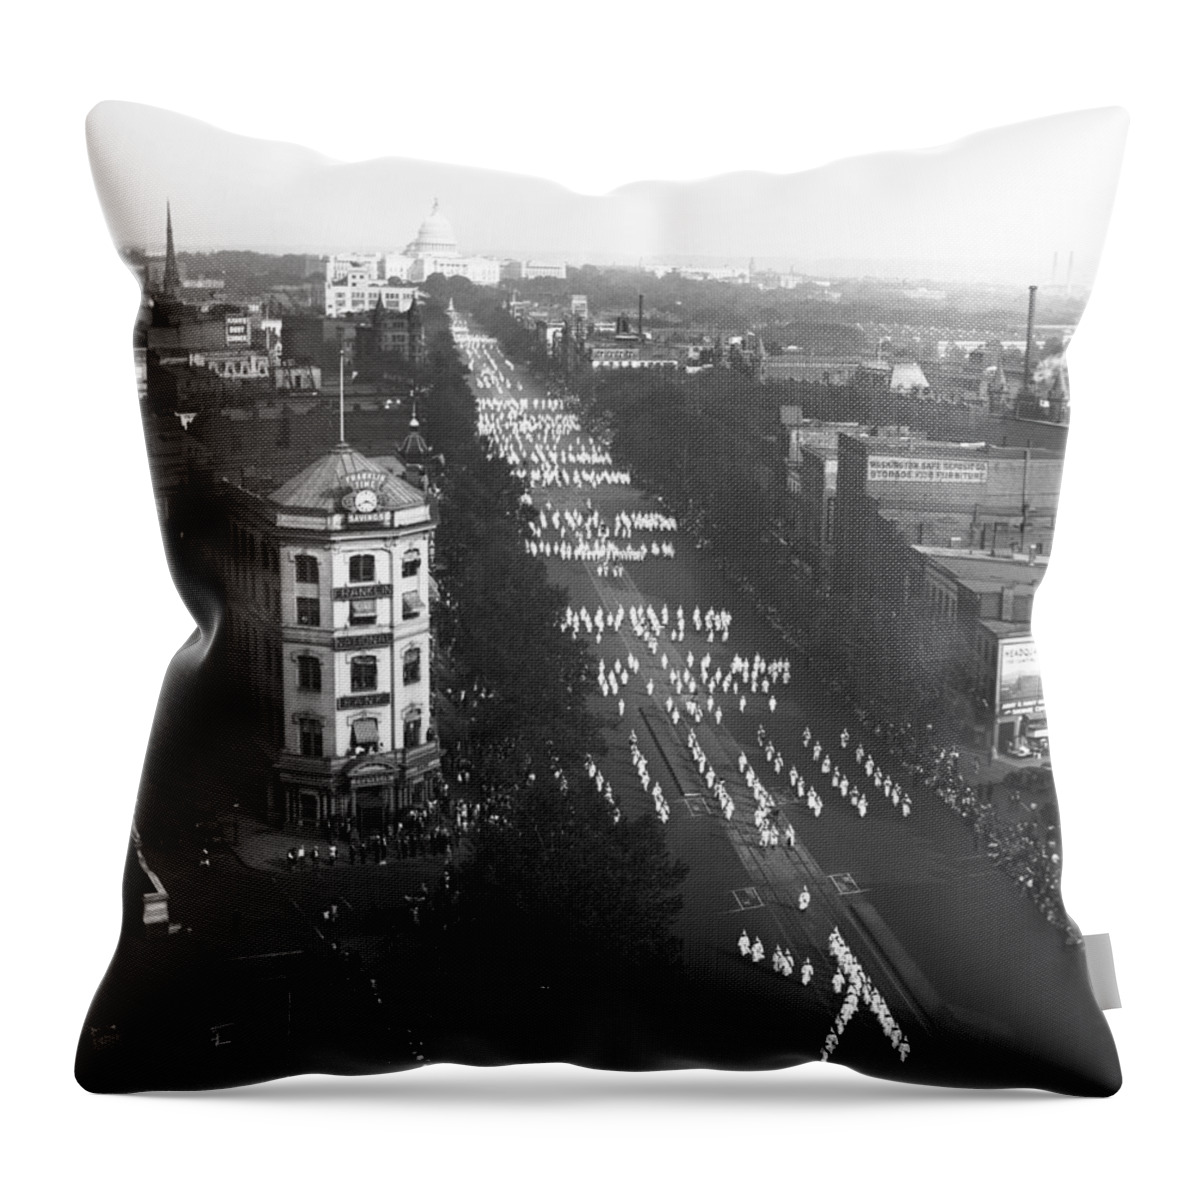 1926 Throw Pillow featuring the photograph Ku Klux Klan Parade by Underwood Archives